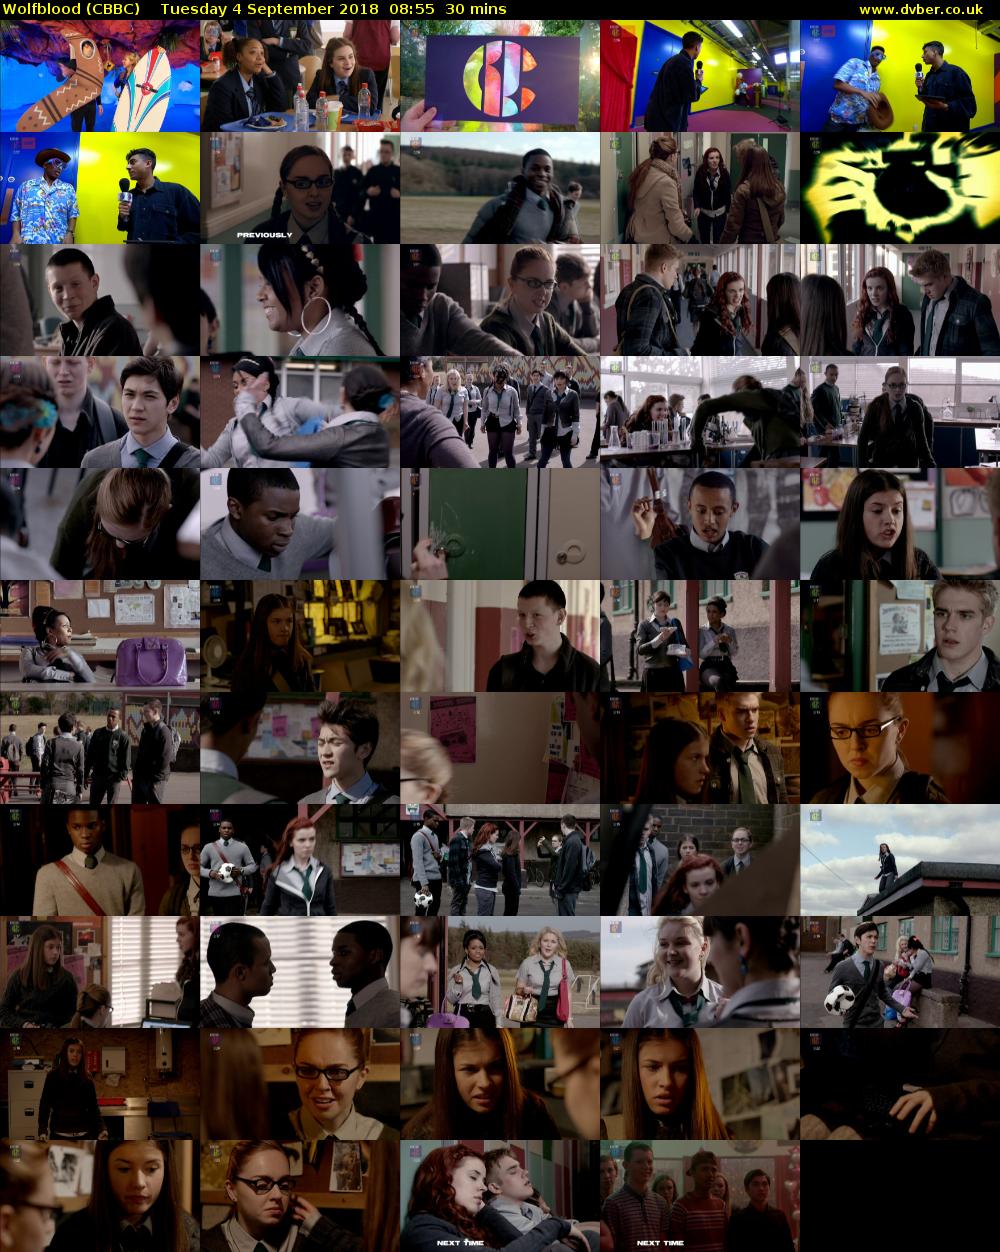 Wolfblood (CBBC) Tuesday 4 September 2018 08:55 - 09:25